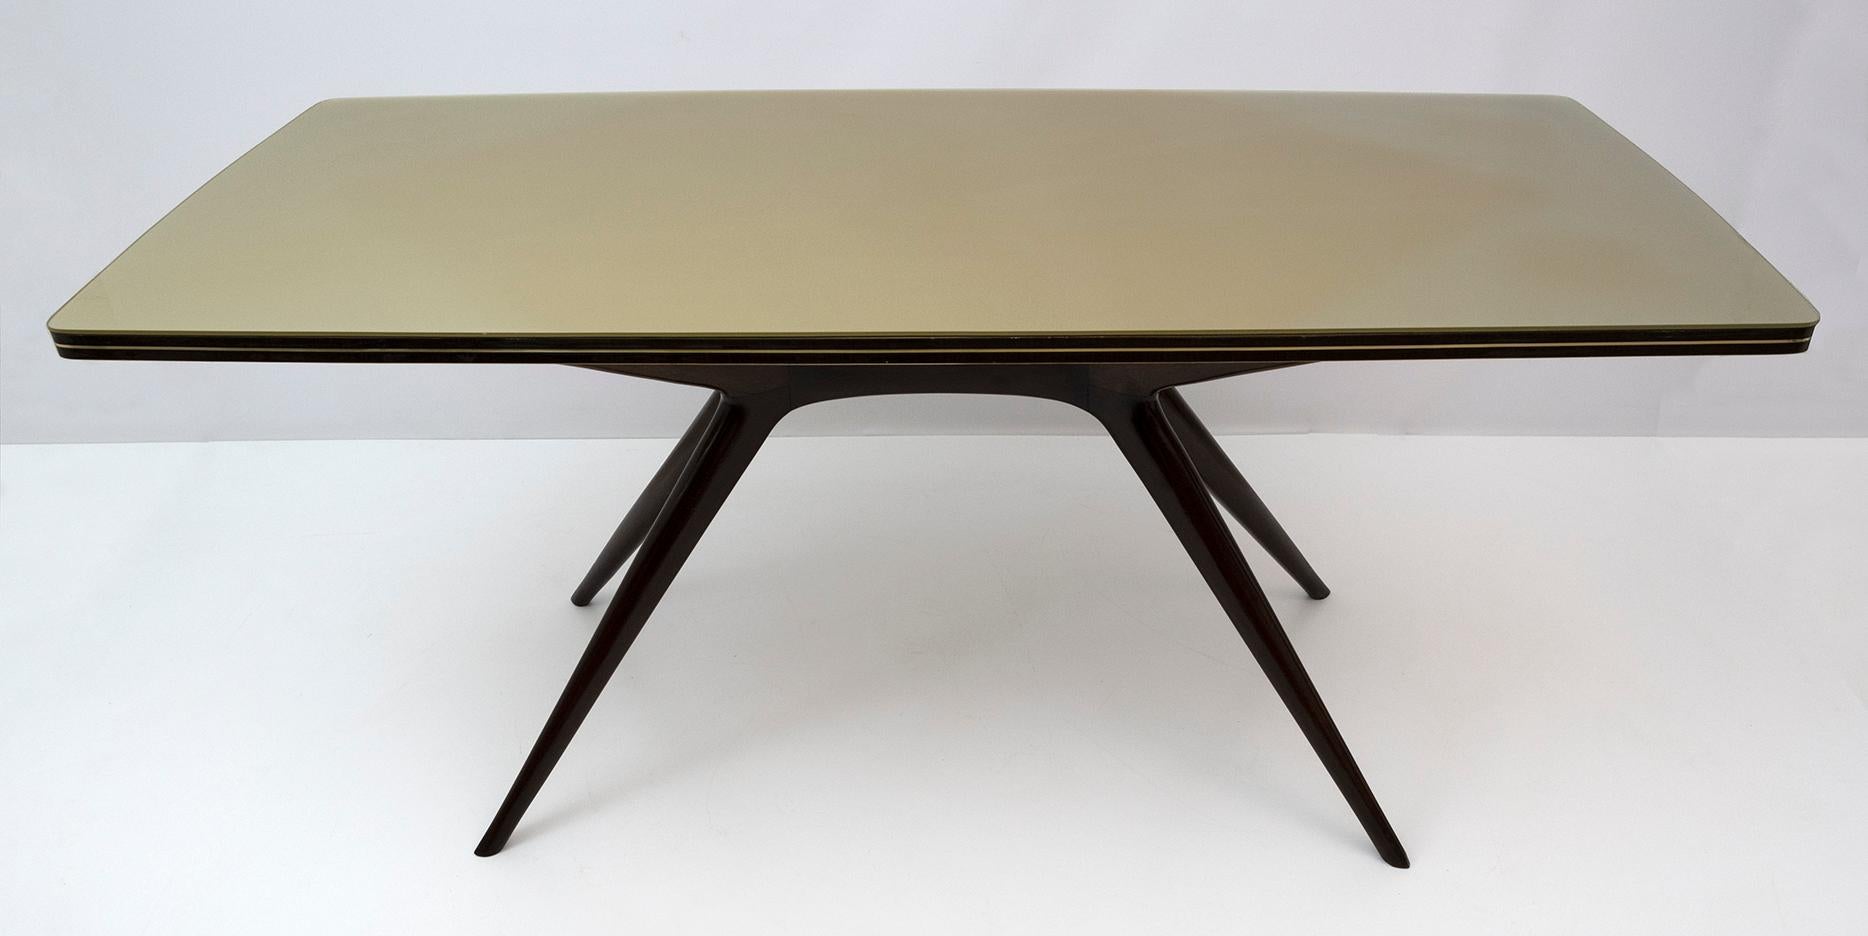 To remember: dining table in dark walnut and top in Italian bronzed glass in the Ico Parisi style of the 50s. The table has a beautiful sculptural shape. The table has been polished with shellac keeping the original patina. The glass top has a